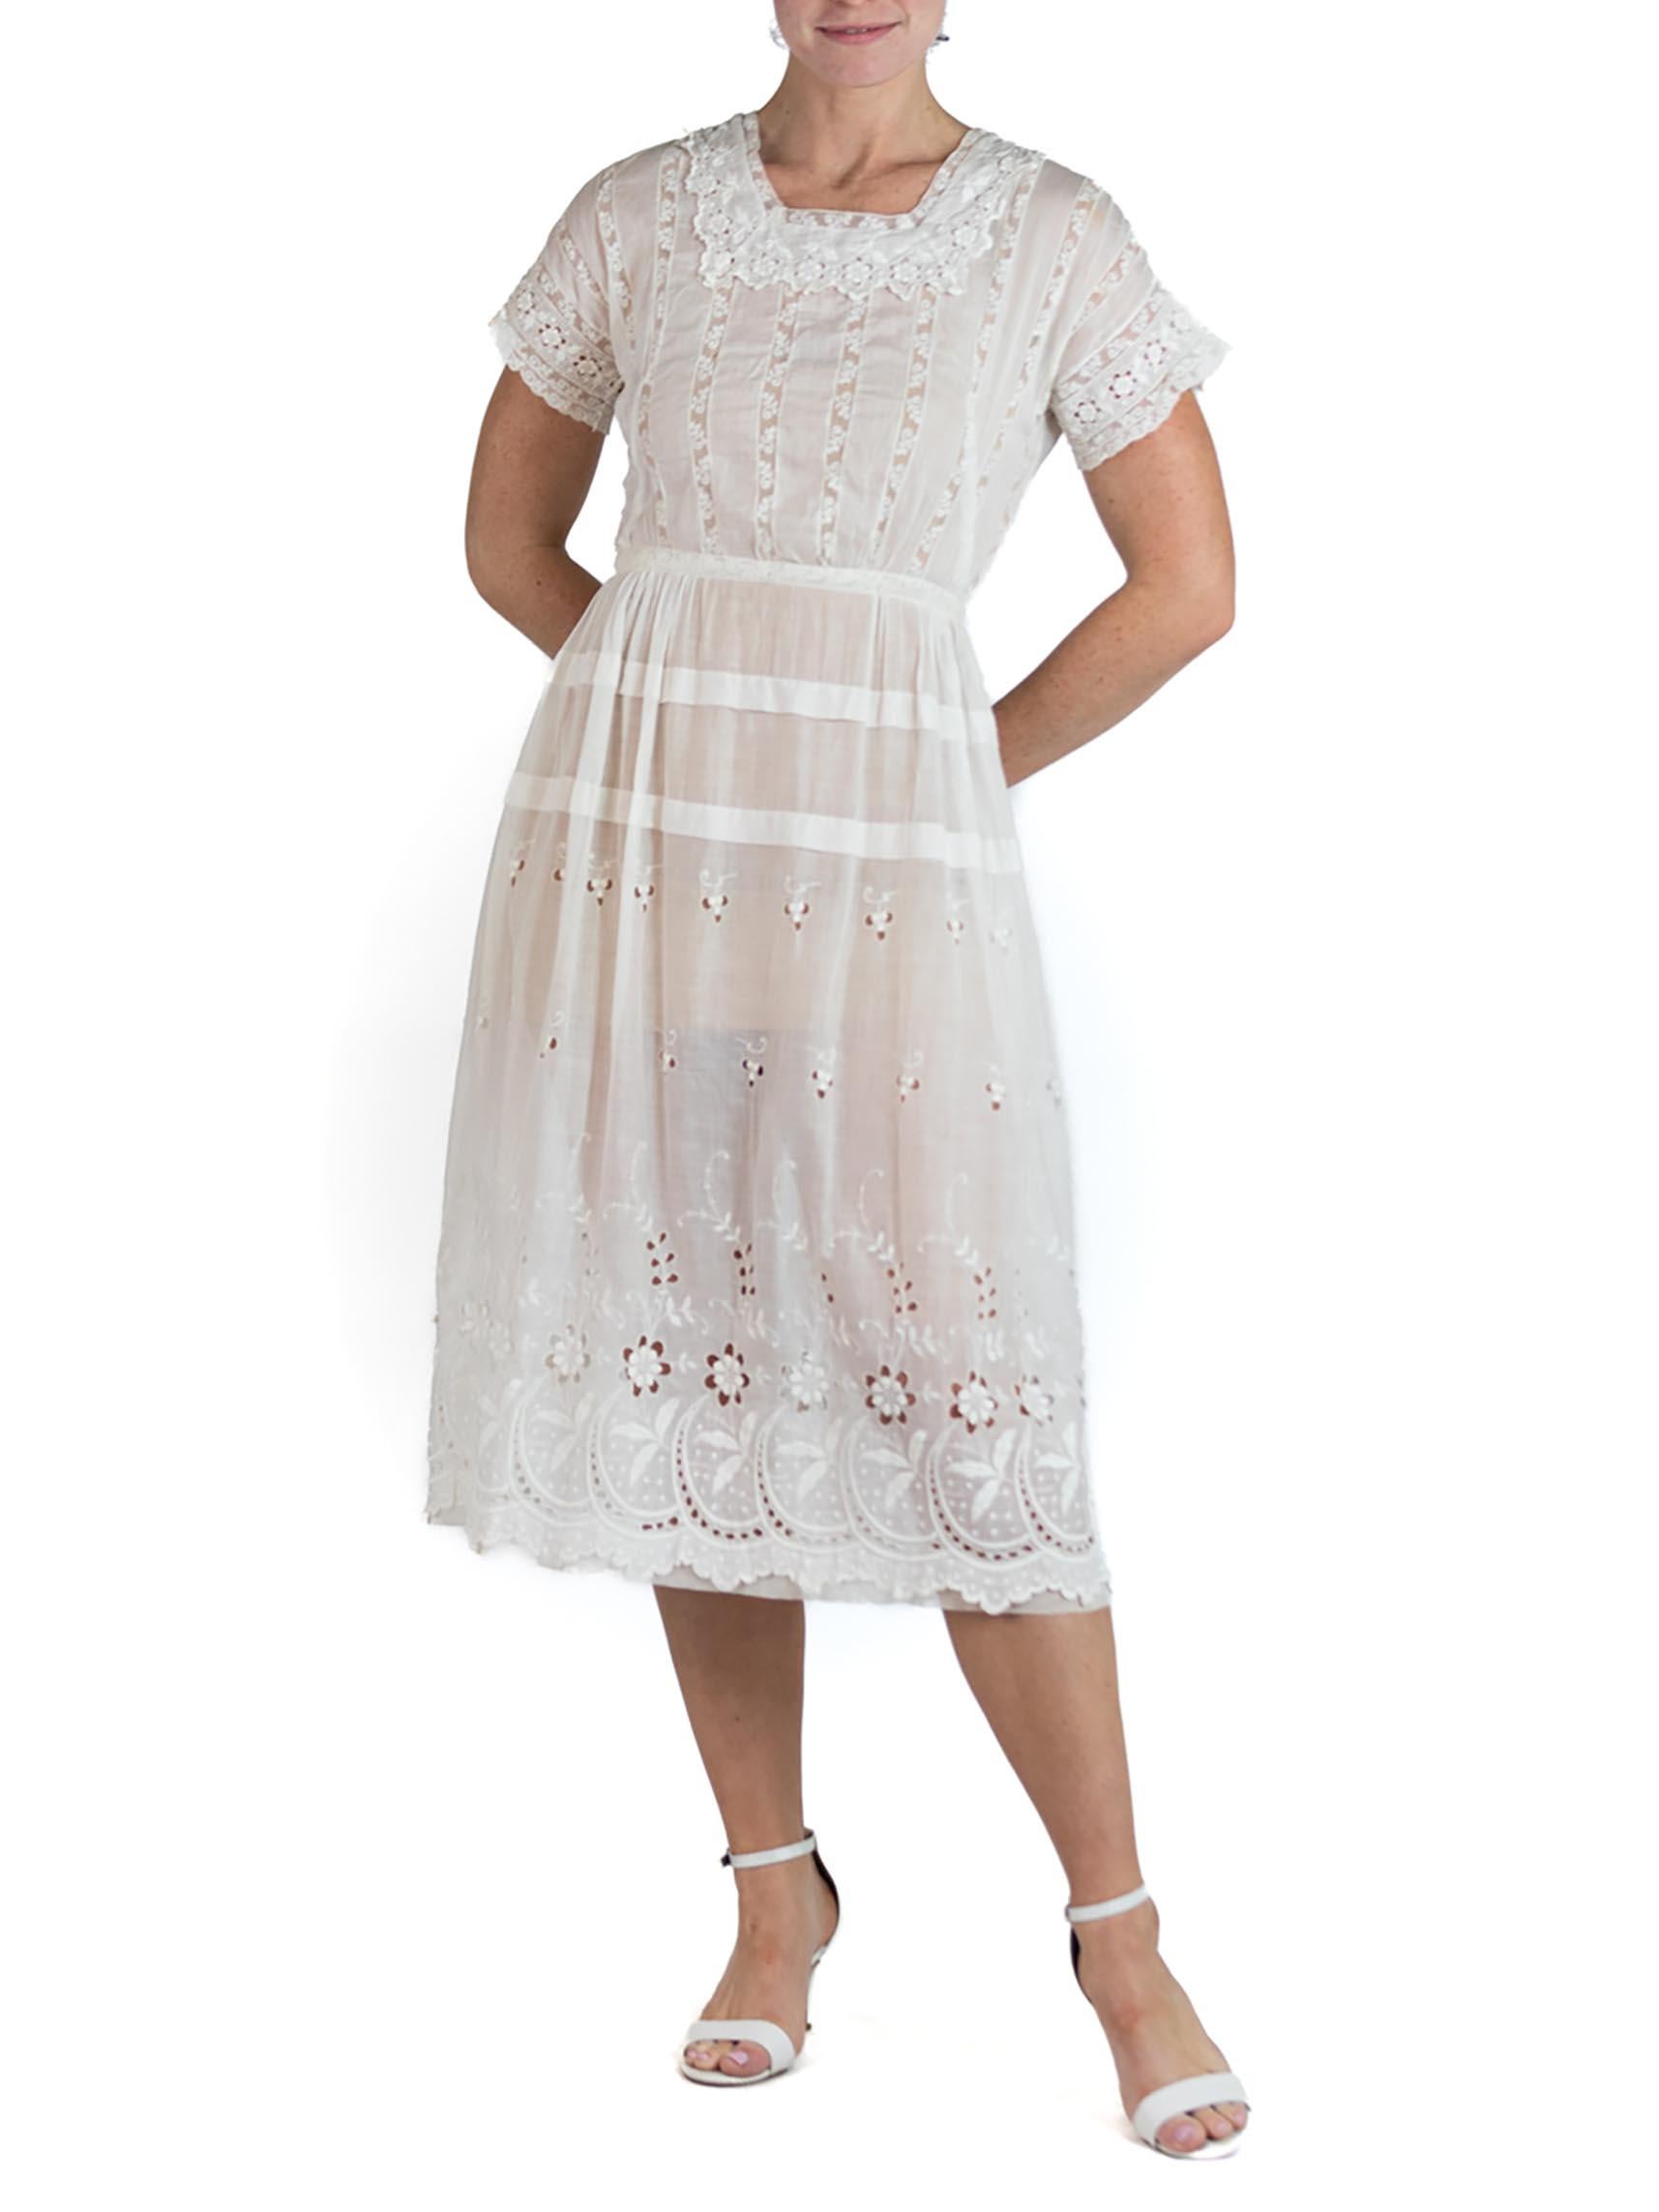 Edwardian White Organic Cotton Lawn Embroidered Lace Summer Tea Dress For Sale 1